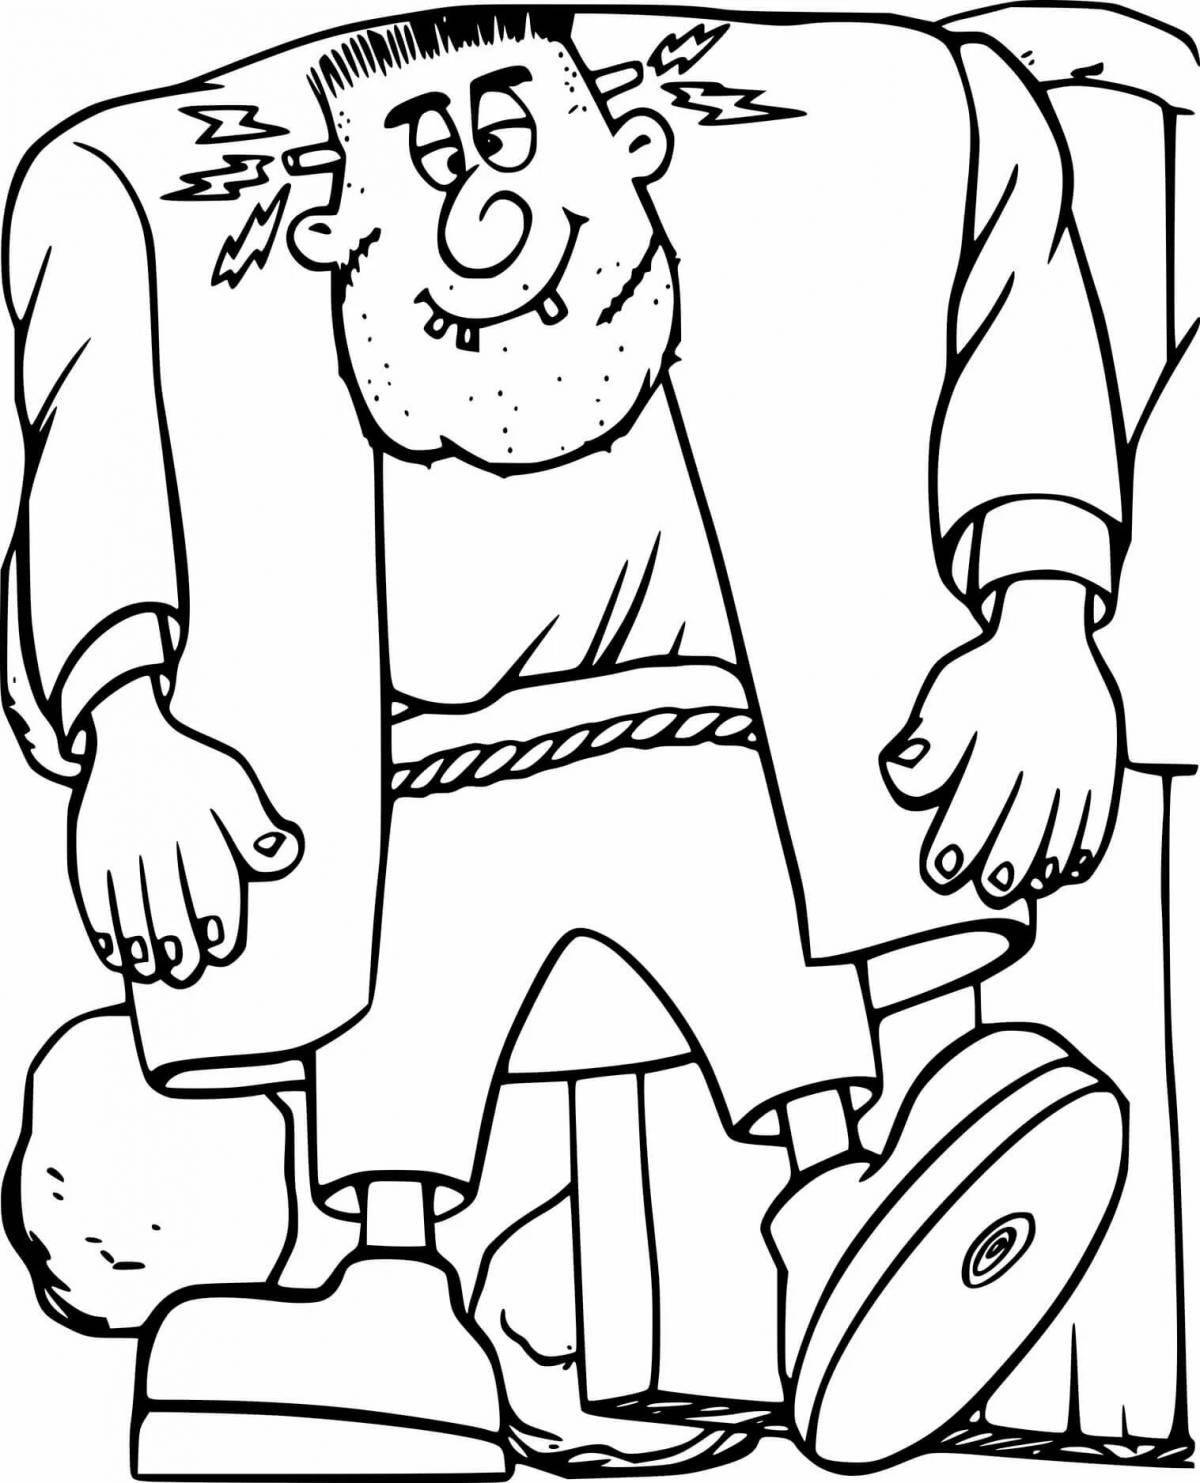 Chilling Frankenstein Coloring Page